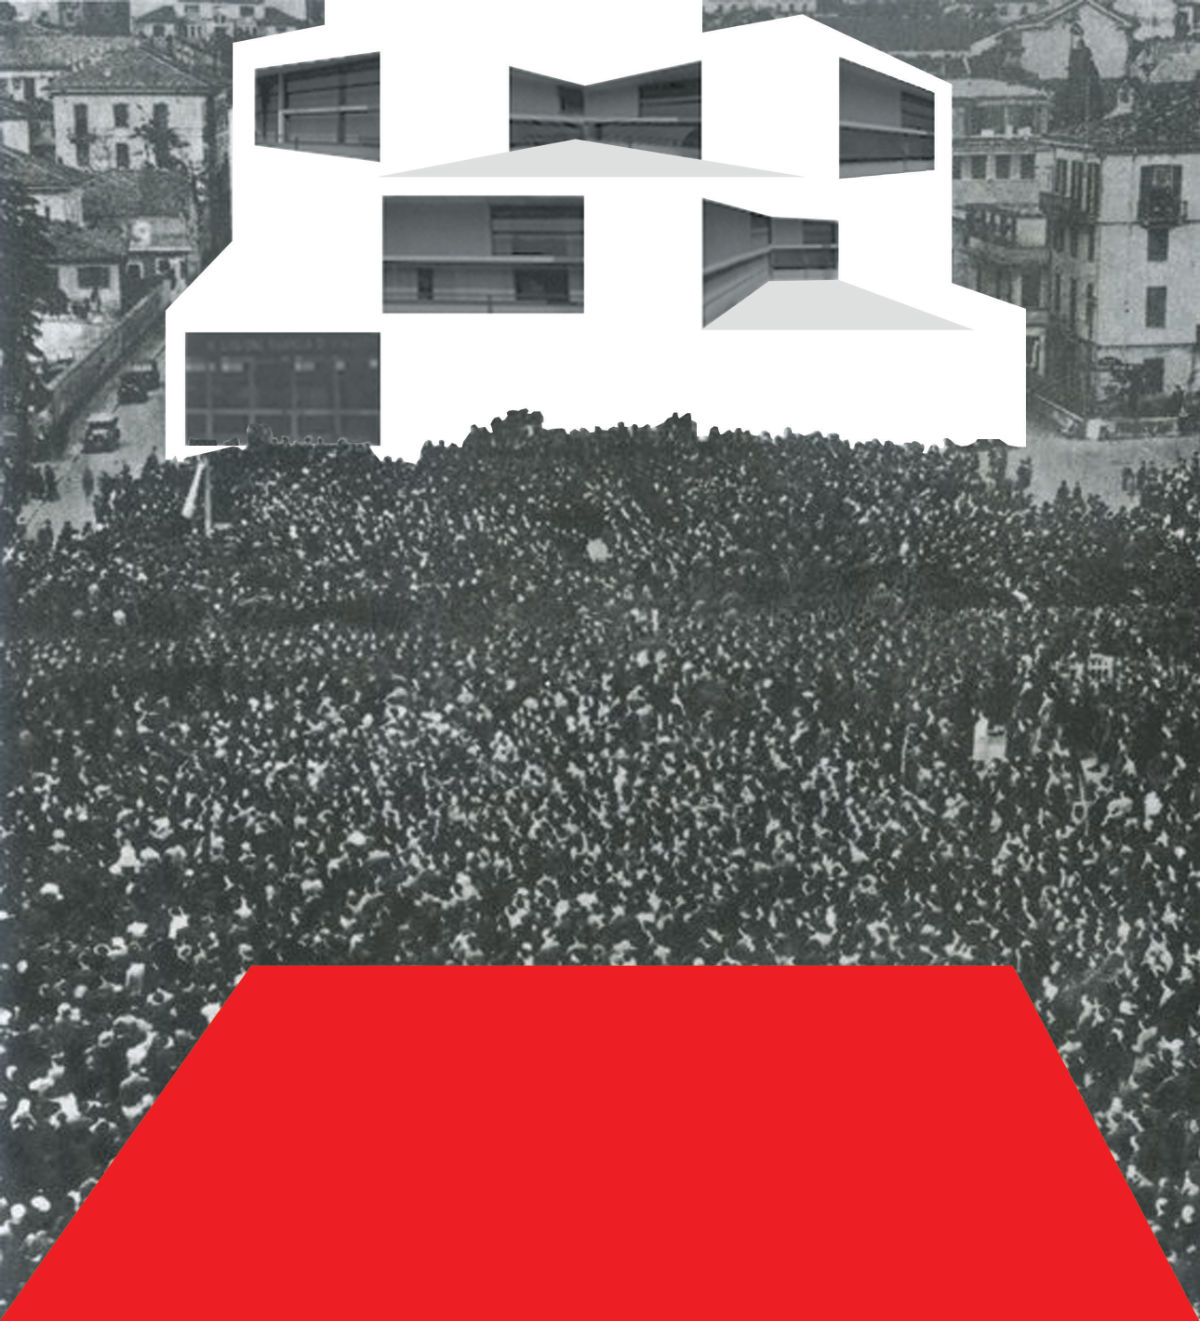 Collage showing dense crowd of people in front of modern architecture and a large geometric field of color in the foreground